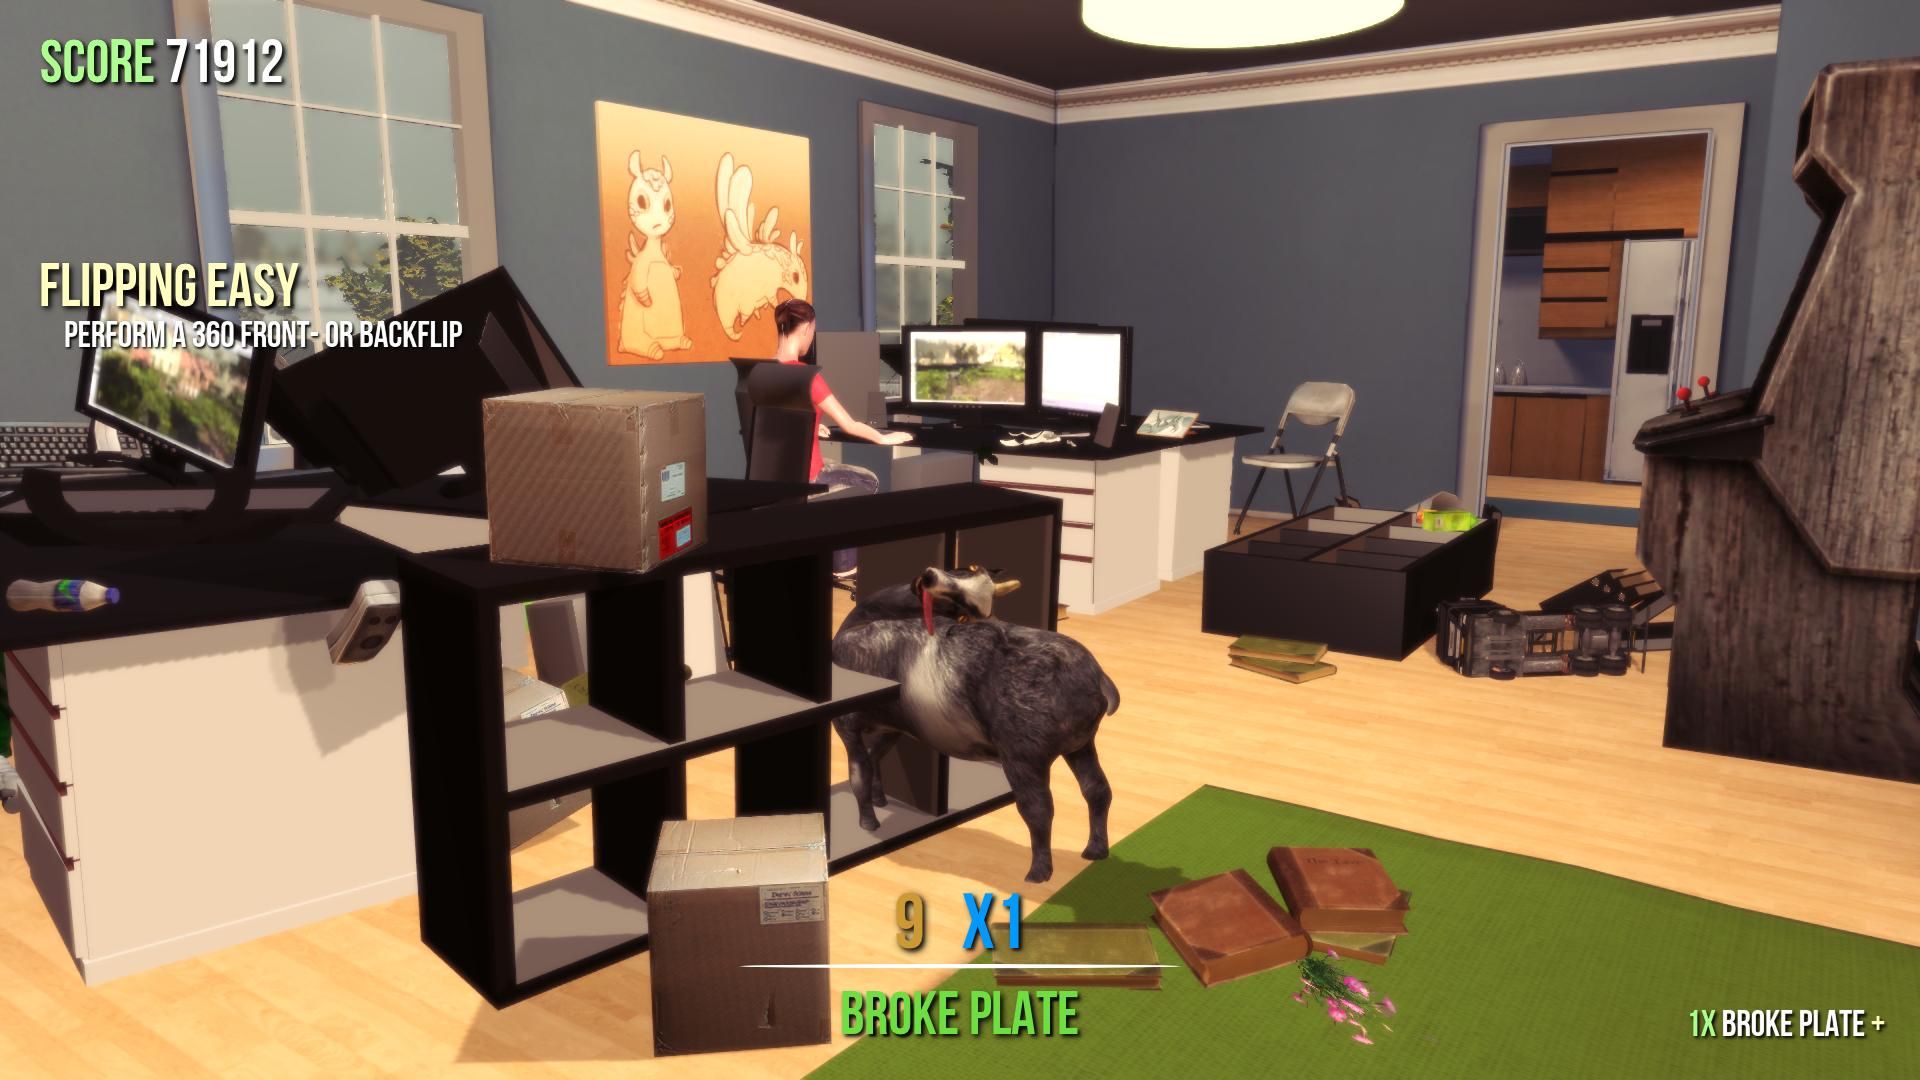 hands on goat simulator review image 5